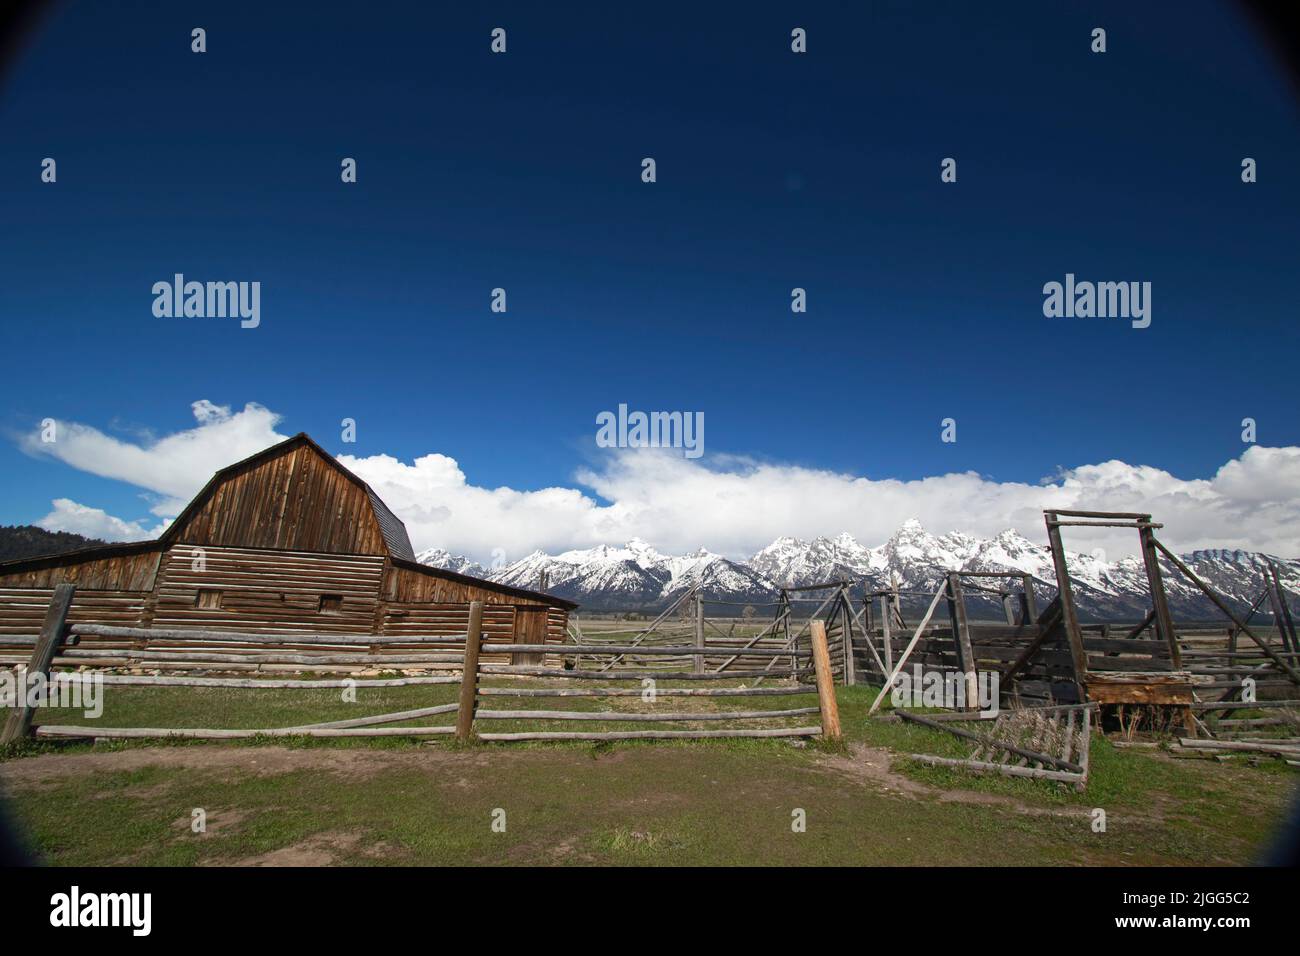 Snow-covered Teton Range serves as a backdrop for a barn at the Mormon Row Historic District in Grand Teton NP, WY. Stock Photo